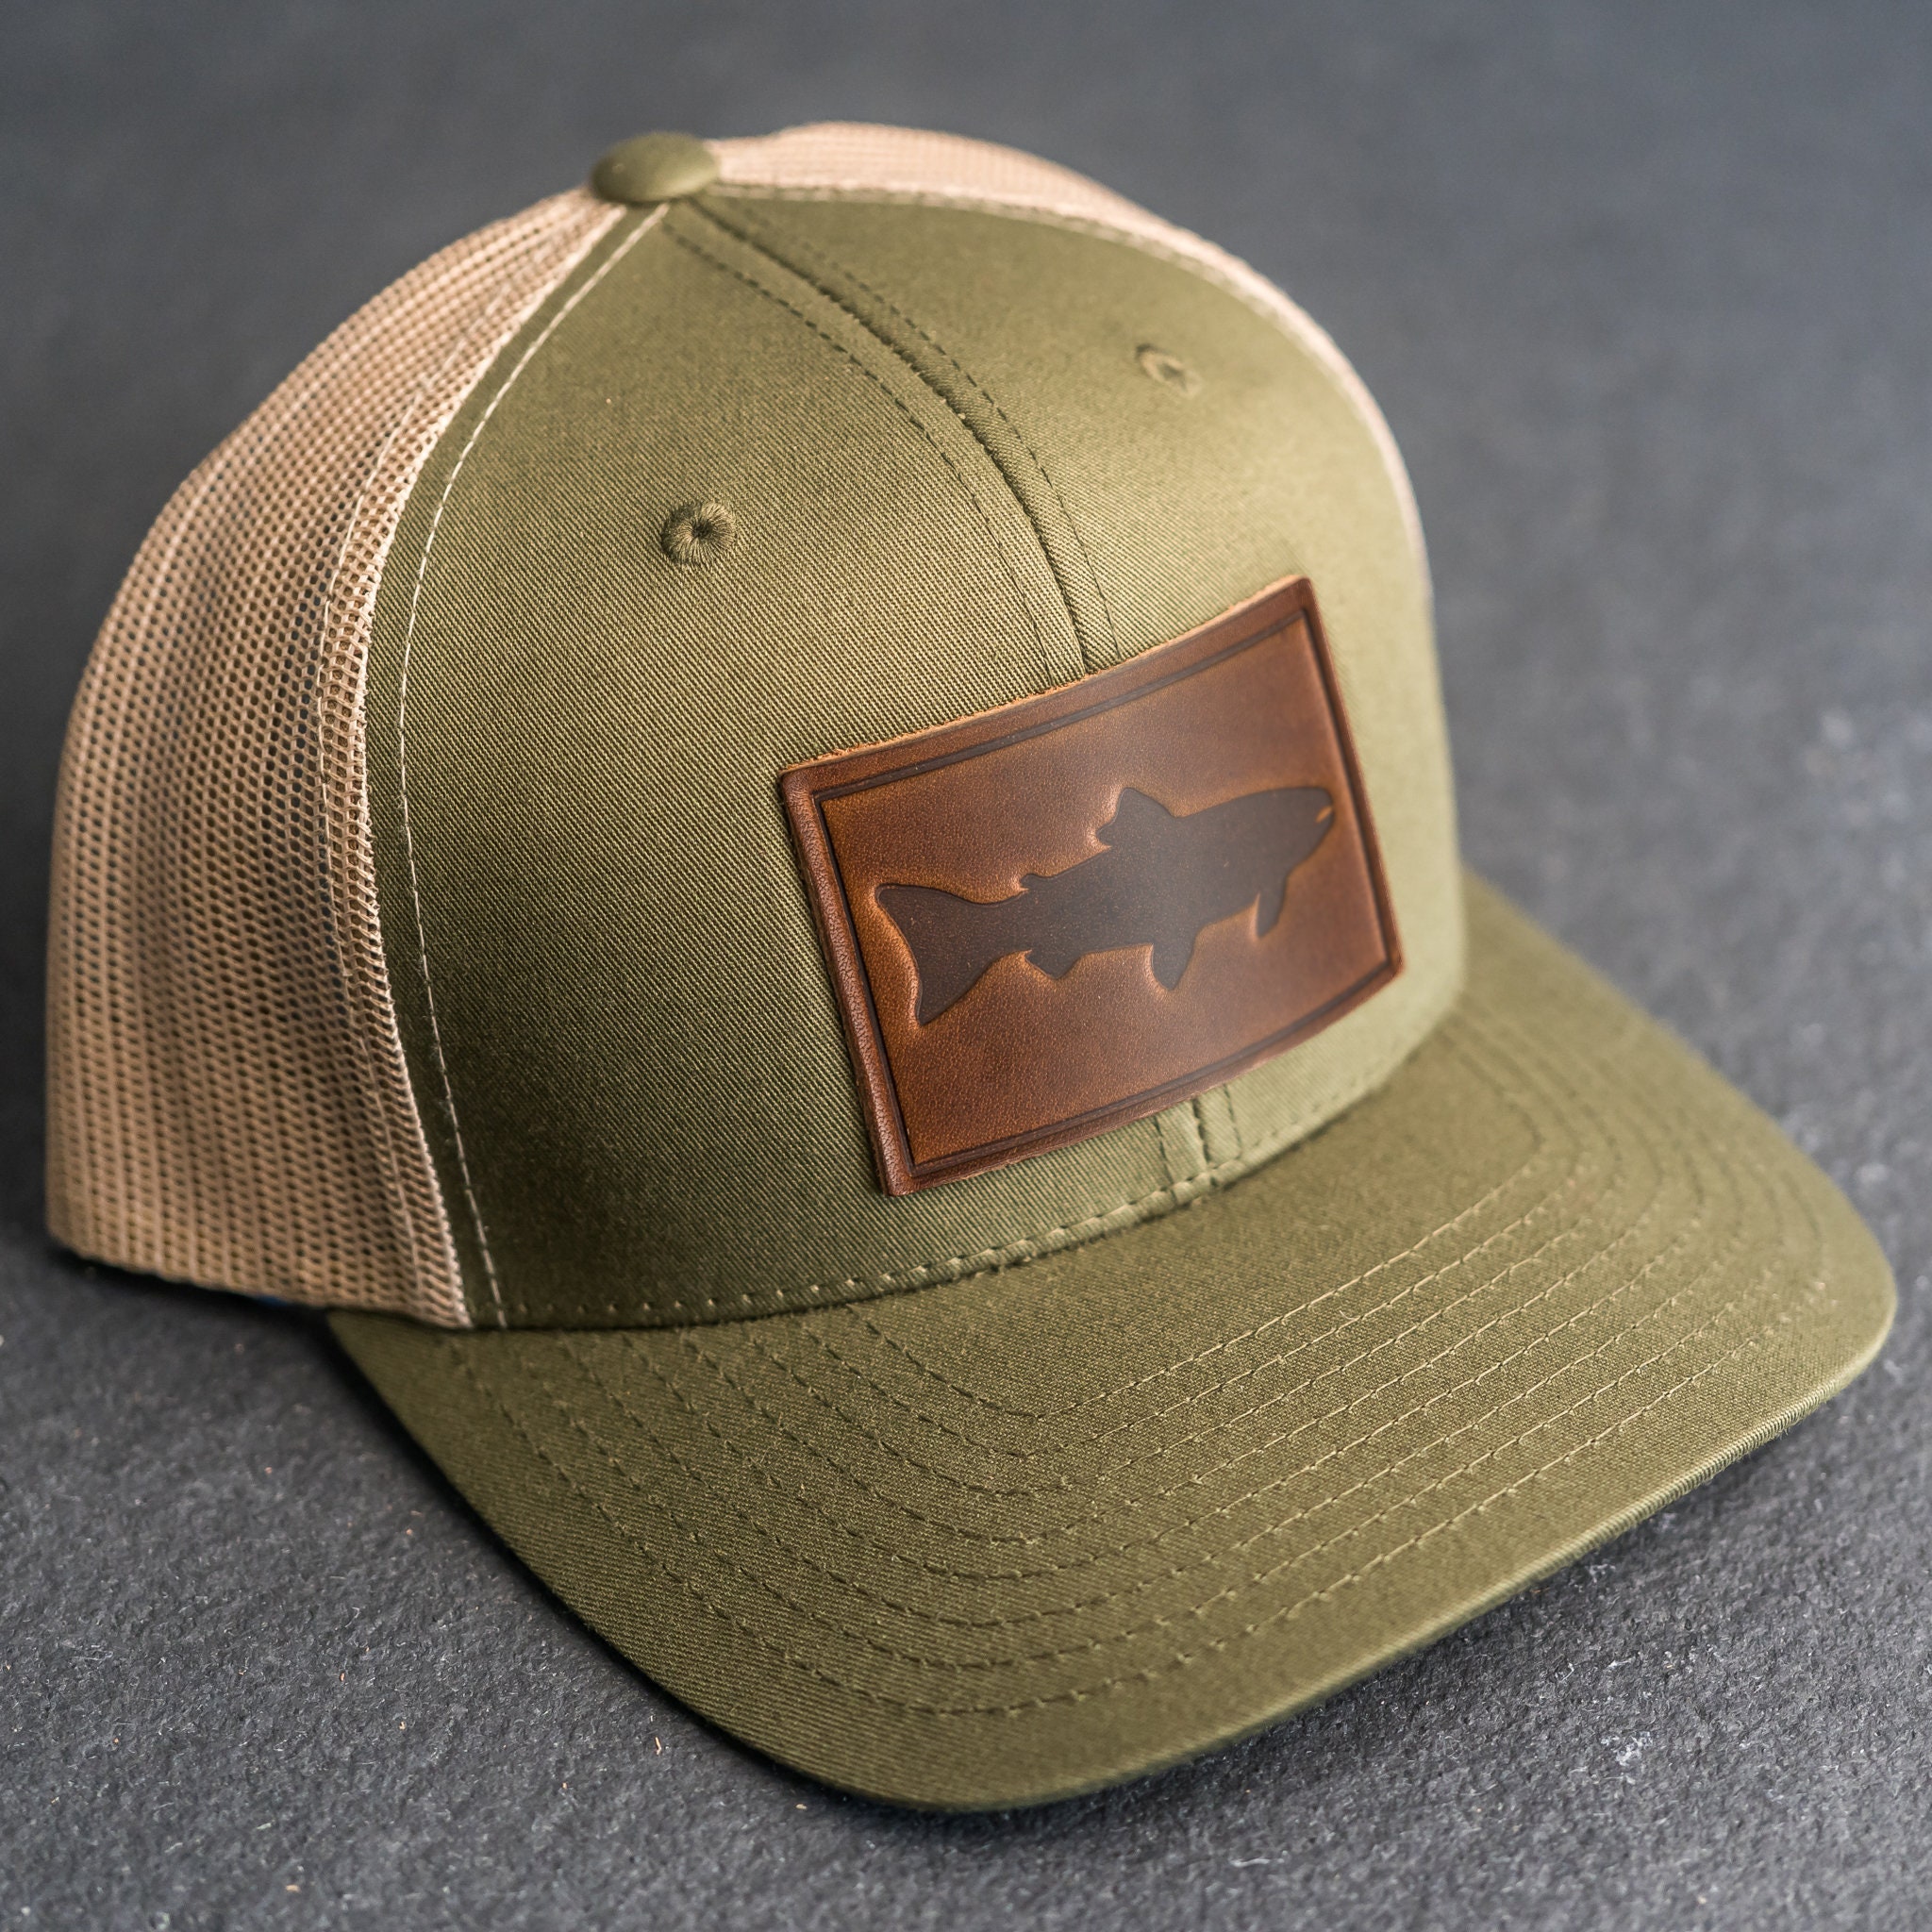 Fish Stamp Hat | Leather Patch Trucker Style Hats for Him or Her | Fishing Hat | Outdoor Hiking Apparel | Gift Ideas